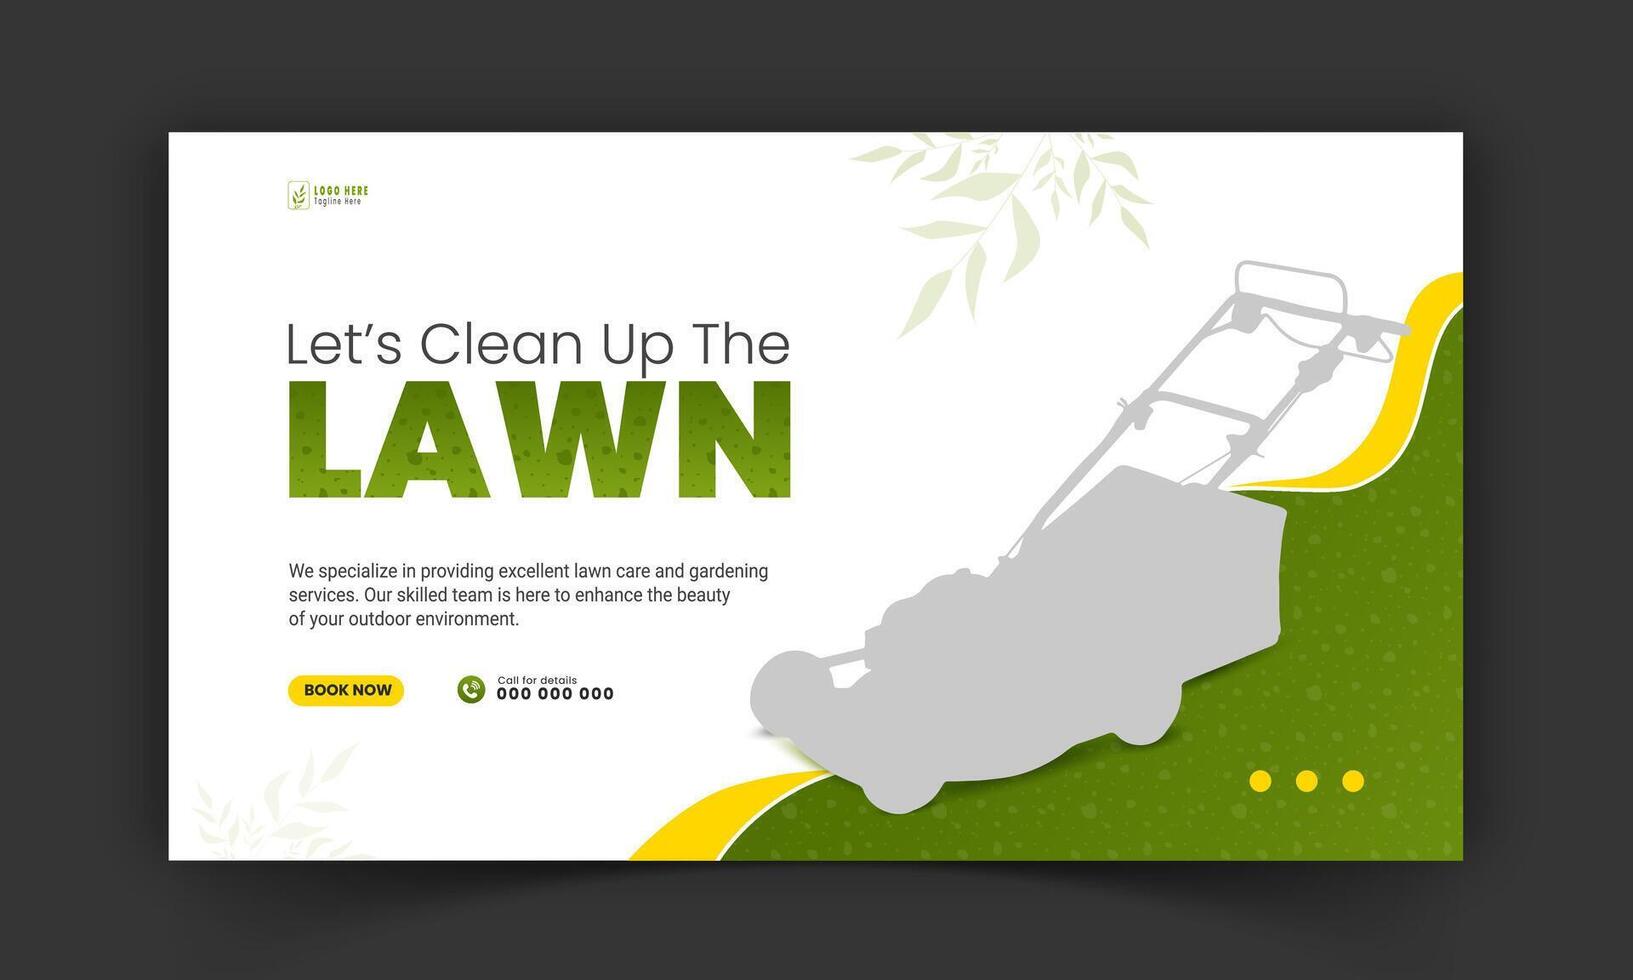 Lawn care and farming service video thumbnail design, modern lawn mower garden, or landscaping service with abstract green and yellow color shapes for social media cover, post, web banner template vector